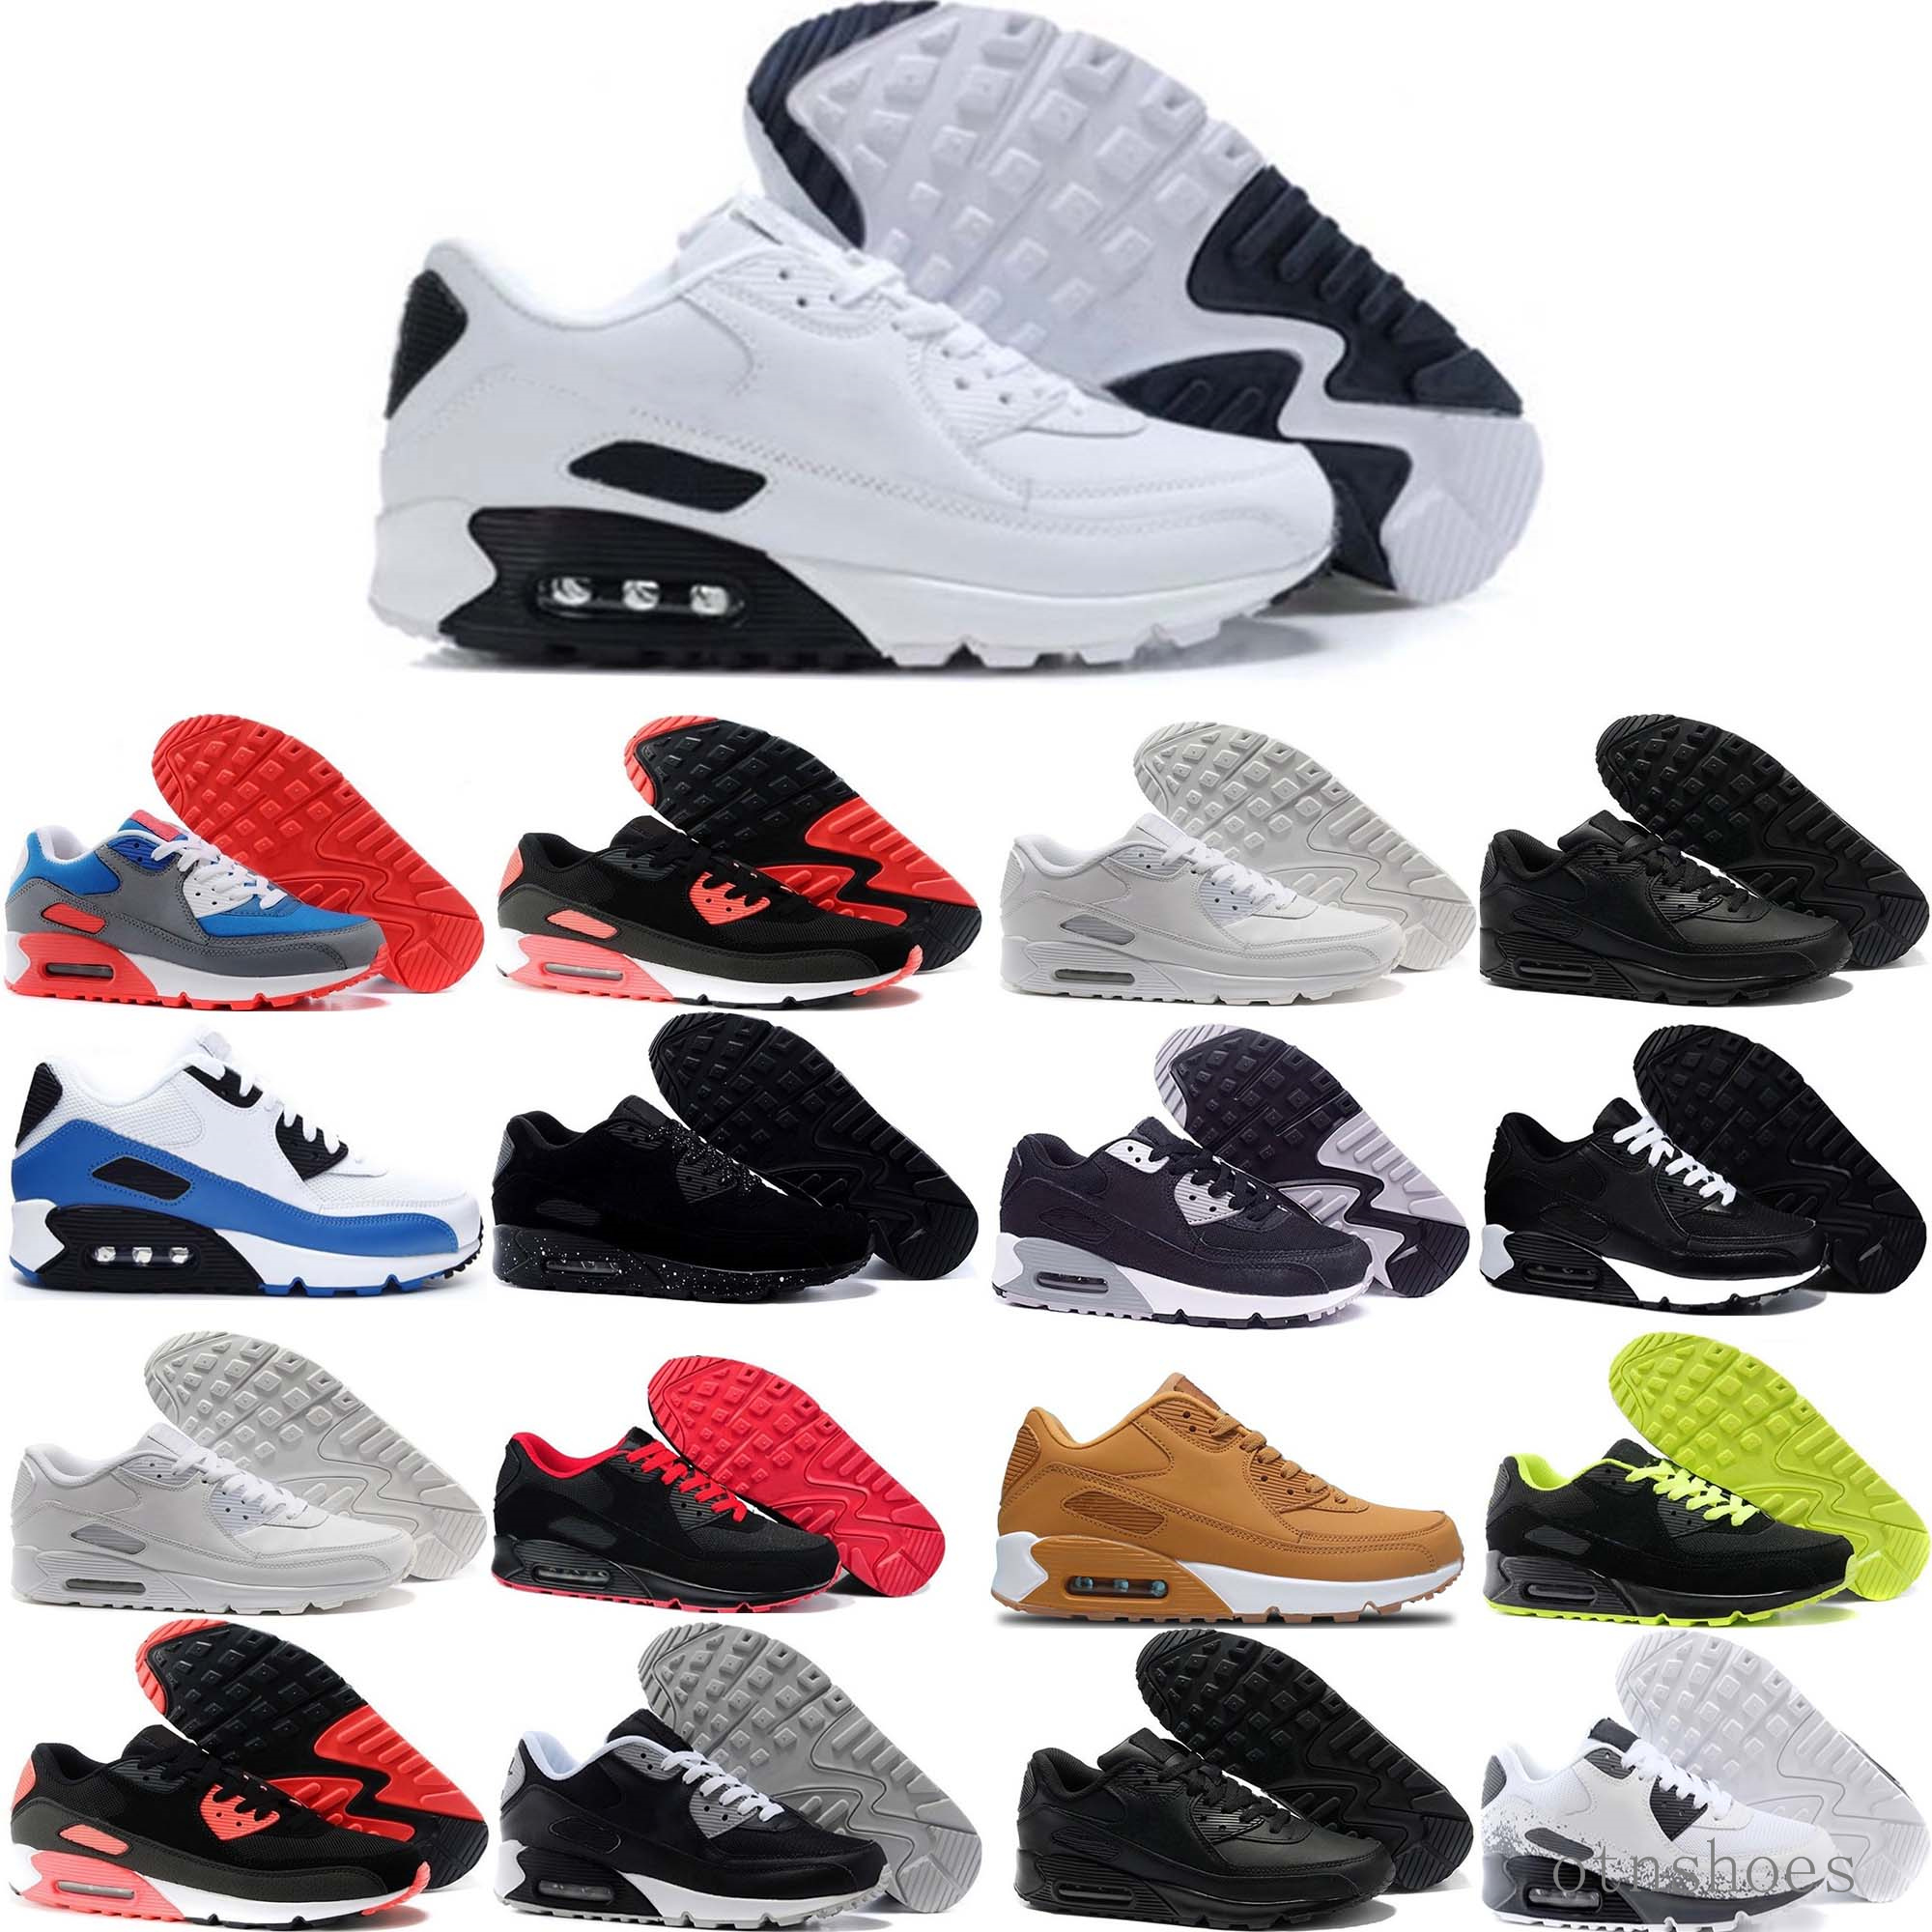 CLASSIC White Mens womens Casual Shoes For Casuals Trainer Shoe Trainers size 36-46